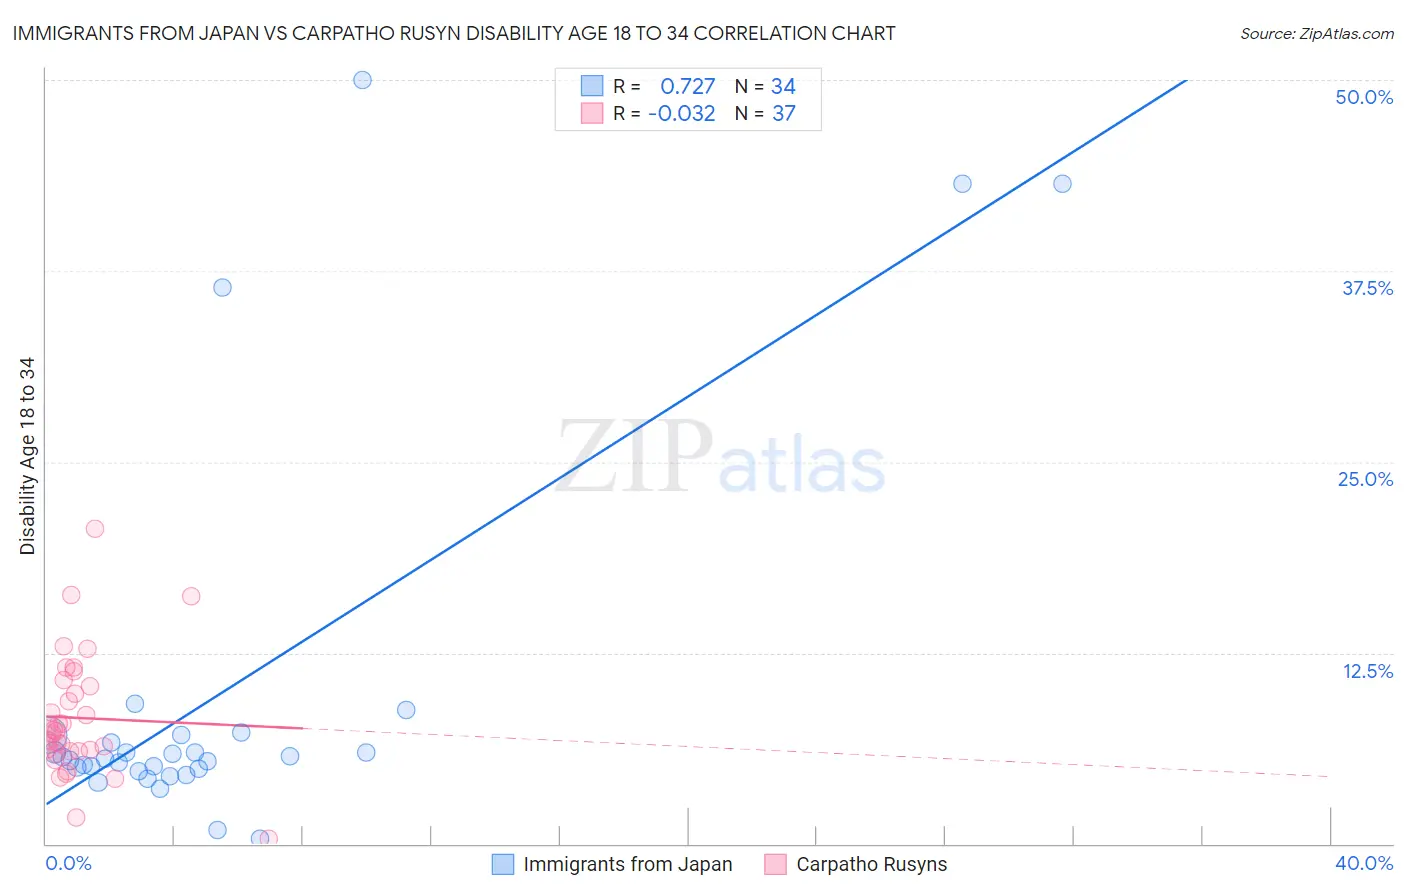 Immigrants from Japan vs Carpatho Rusyn Disability Age 18 to 34